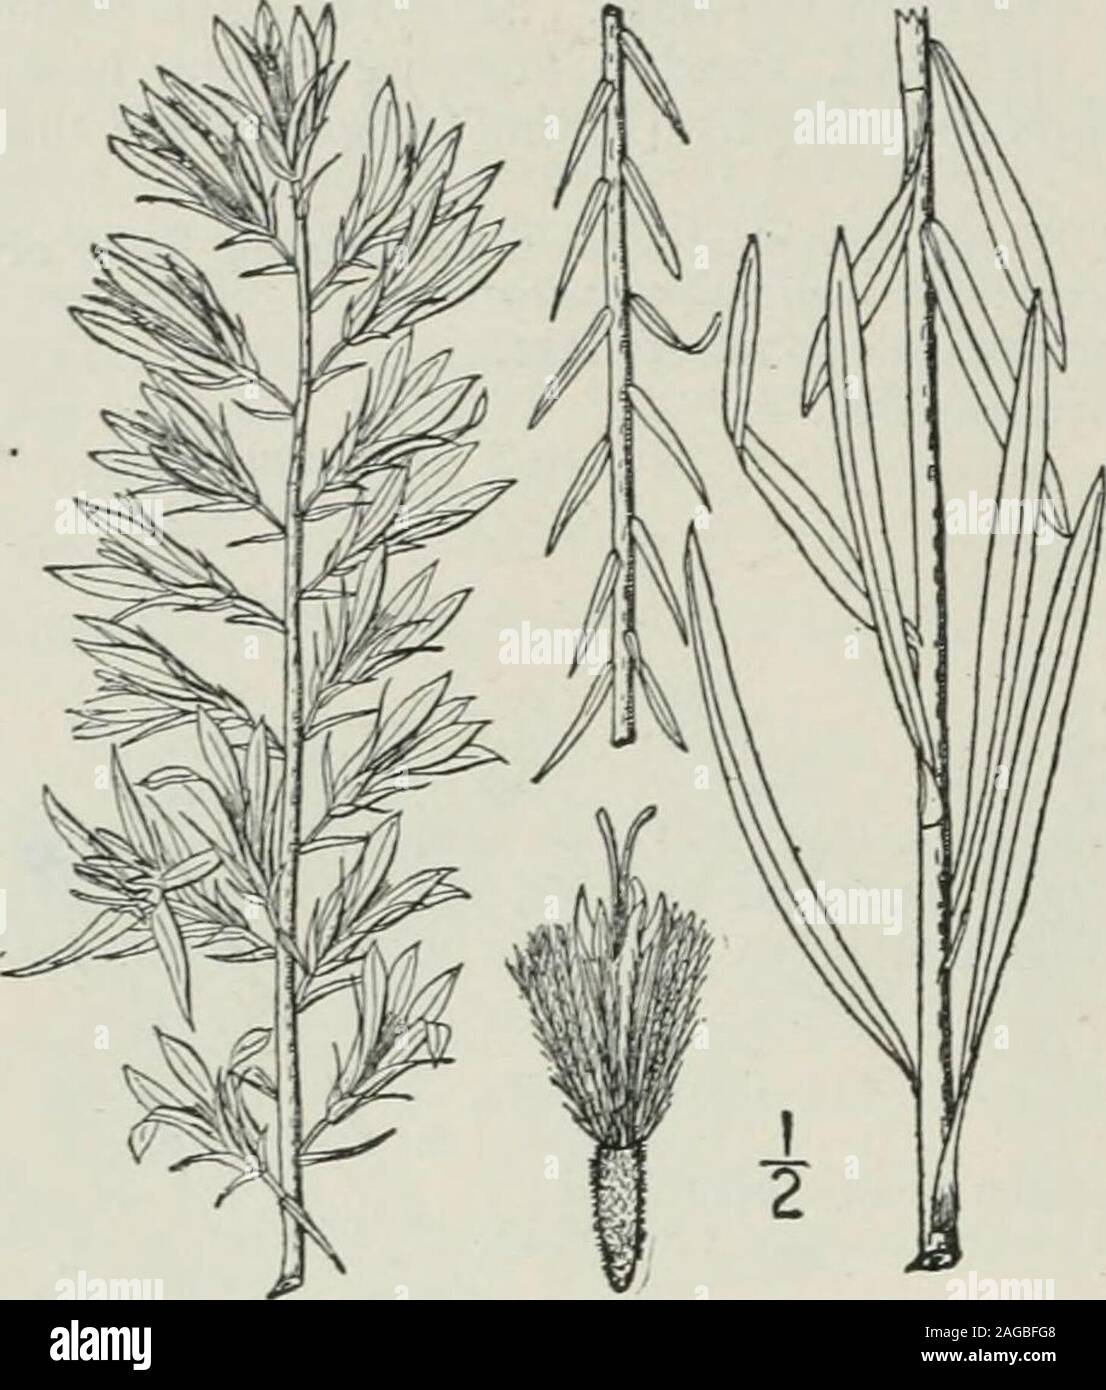 . An illustrated flora of the northern United States, Canada and the British possessions : from Newfoundland to the parallel of the southern boundary of Virginia and from the Atlantic Ocean westward to the 102nd meridian. 366 COMPOSITAE. Vol. hi.. 3. Lacinaria elegans (Walt.) Kuntze.Handsome Blazing Star. Fig. 4179. Stoepelina elegans Walt. Fl. Car. 202. 1788. Liatris elegans Willd. Sp. PI. 3: 1635. 1804. Lacinaria elegans Kuntze, Rev. Gen. PI. 349. 1891. Densely and finely pubescent, rarely glabrate,2°-3° high. Leaves linear, very punctate, I-slong, i-3 wide, the upper much smaller thanthe lo Stock Photo